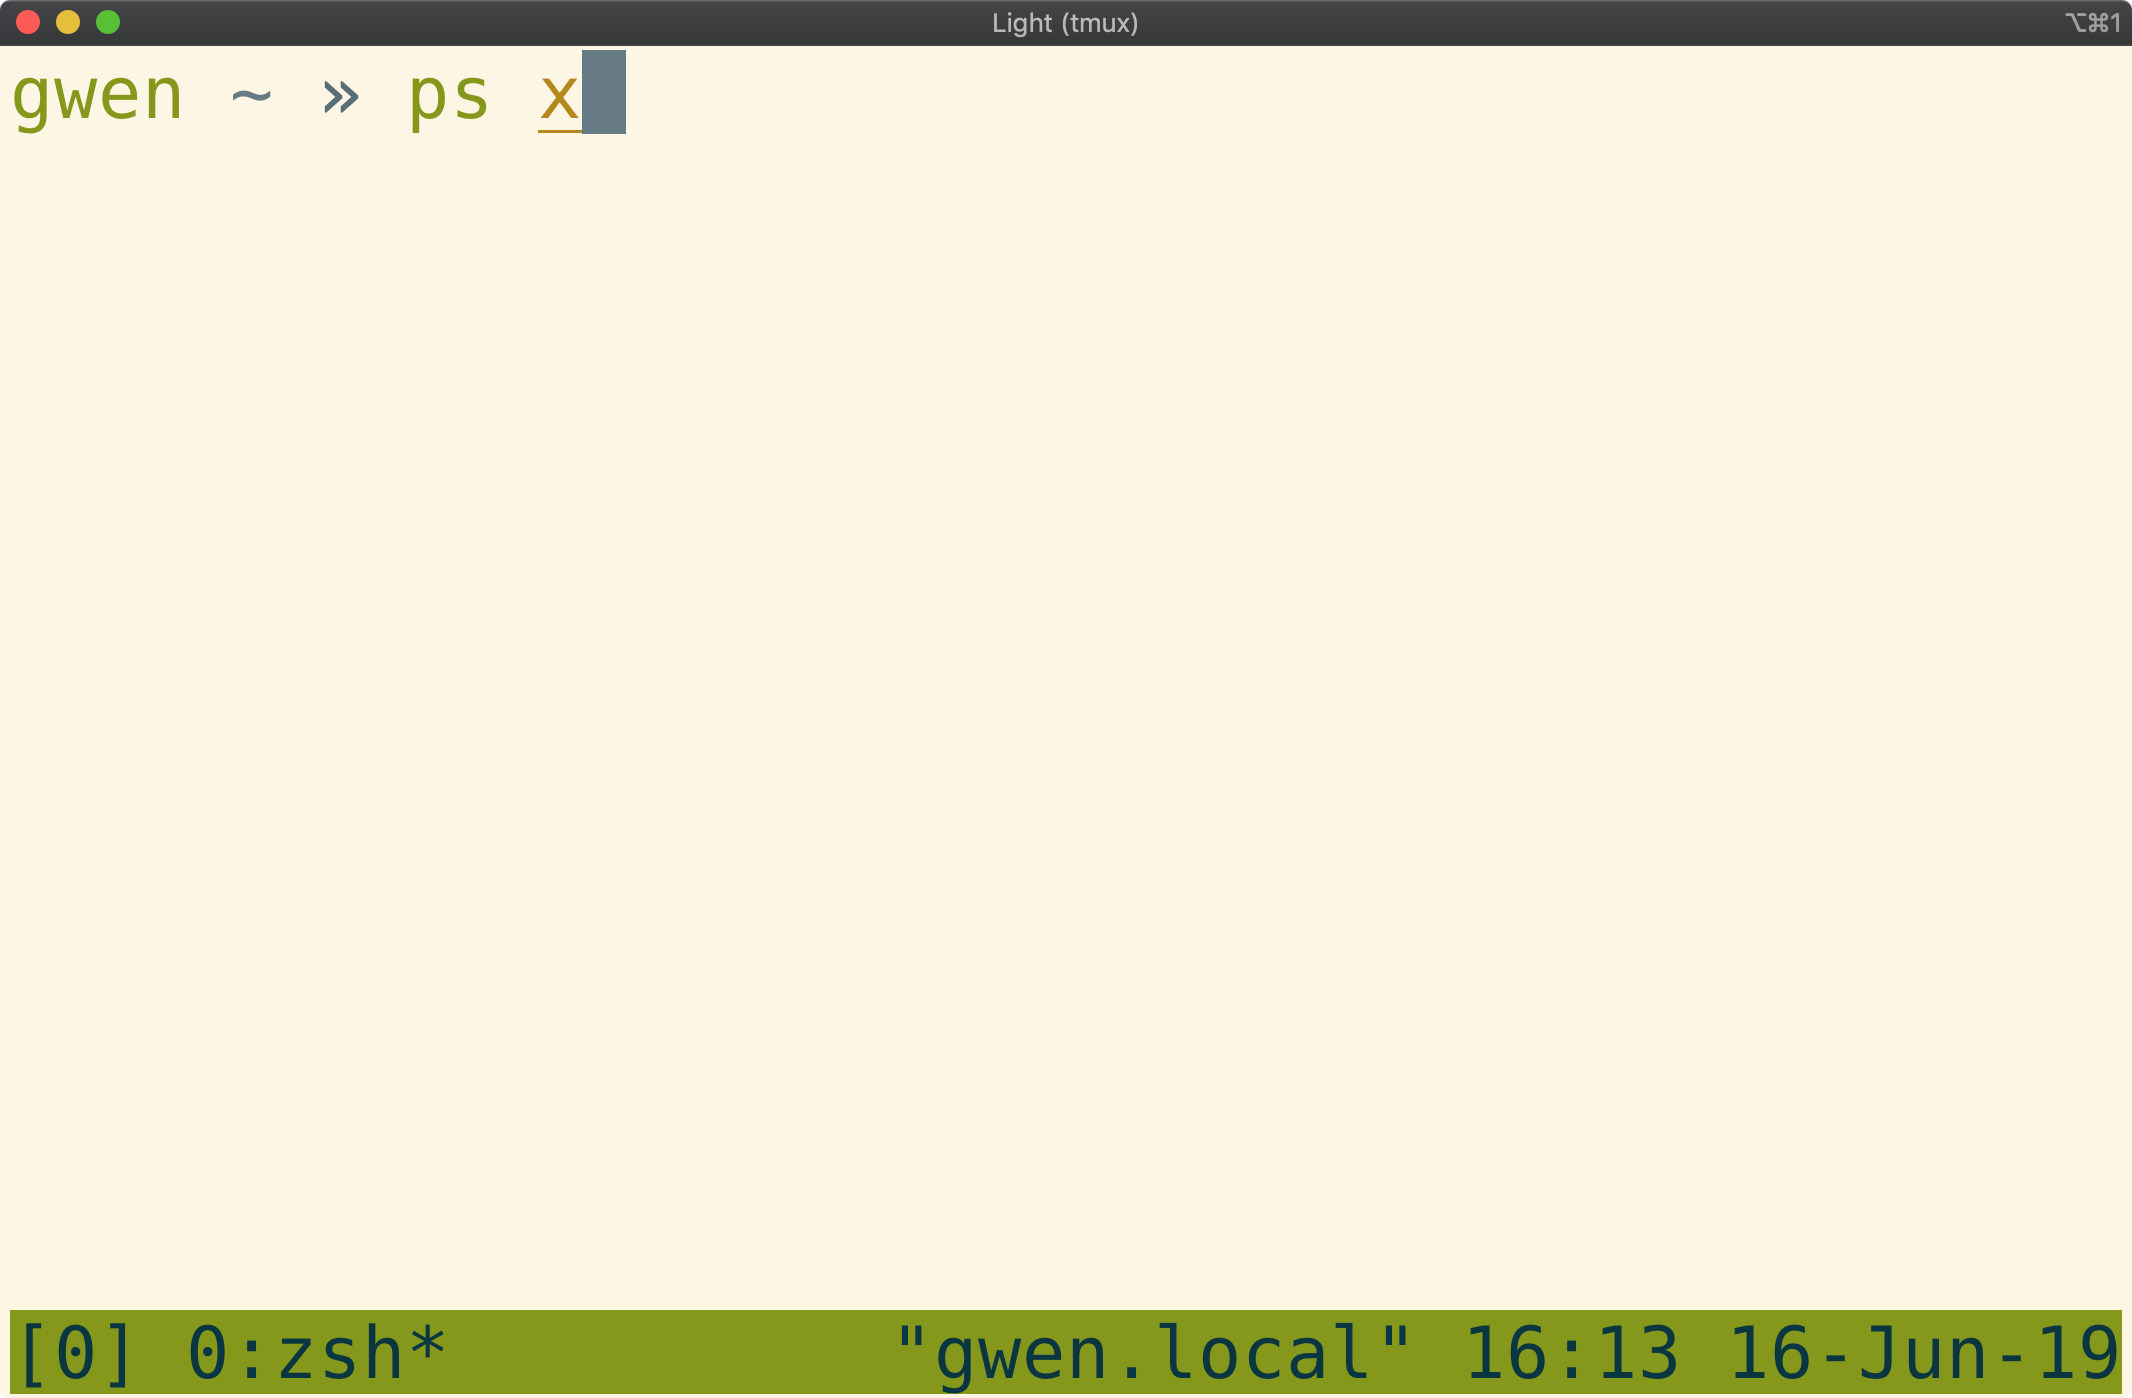 Tmux window showing a "ps au" command typed in